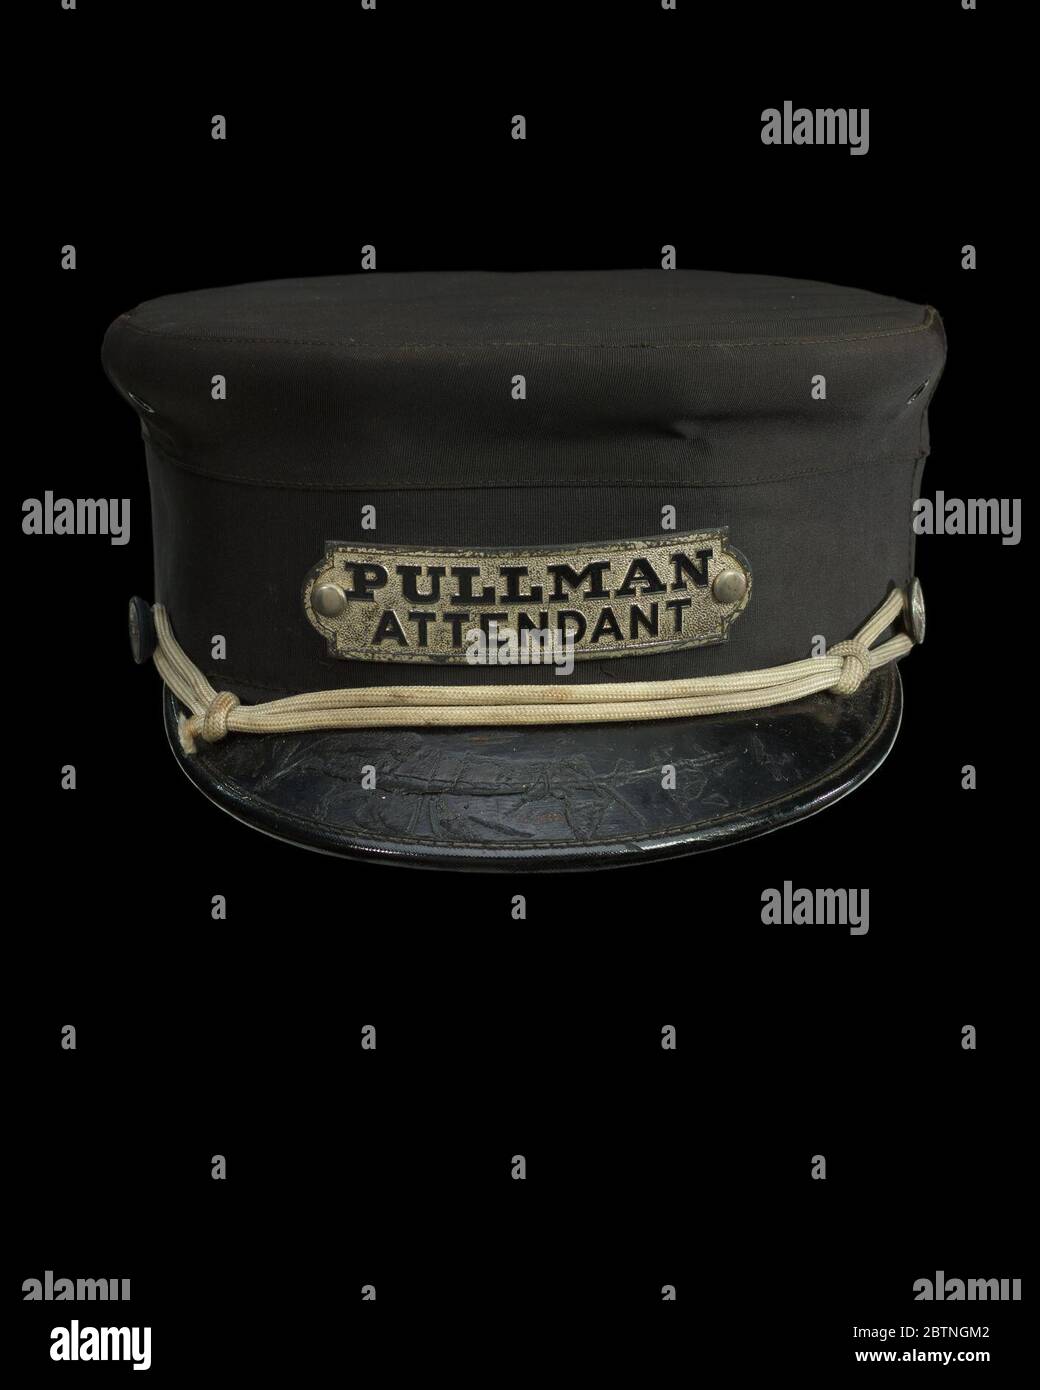 Uniform cap for a Pullman attendant. Uniform cap worn by attendants on Pullman railway cars. The hat is in the style of peaked cap with a leather brim. A cream colored cord wraps around the crown of the hat above the brim and has two knots on either side. The leather brim is extremely scratched. Stock Photo